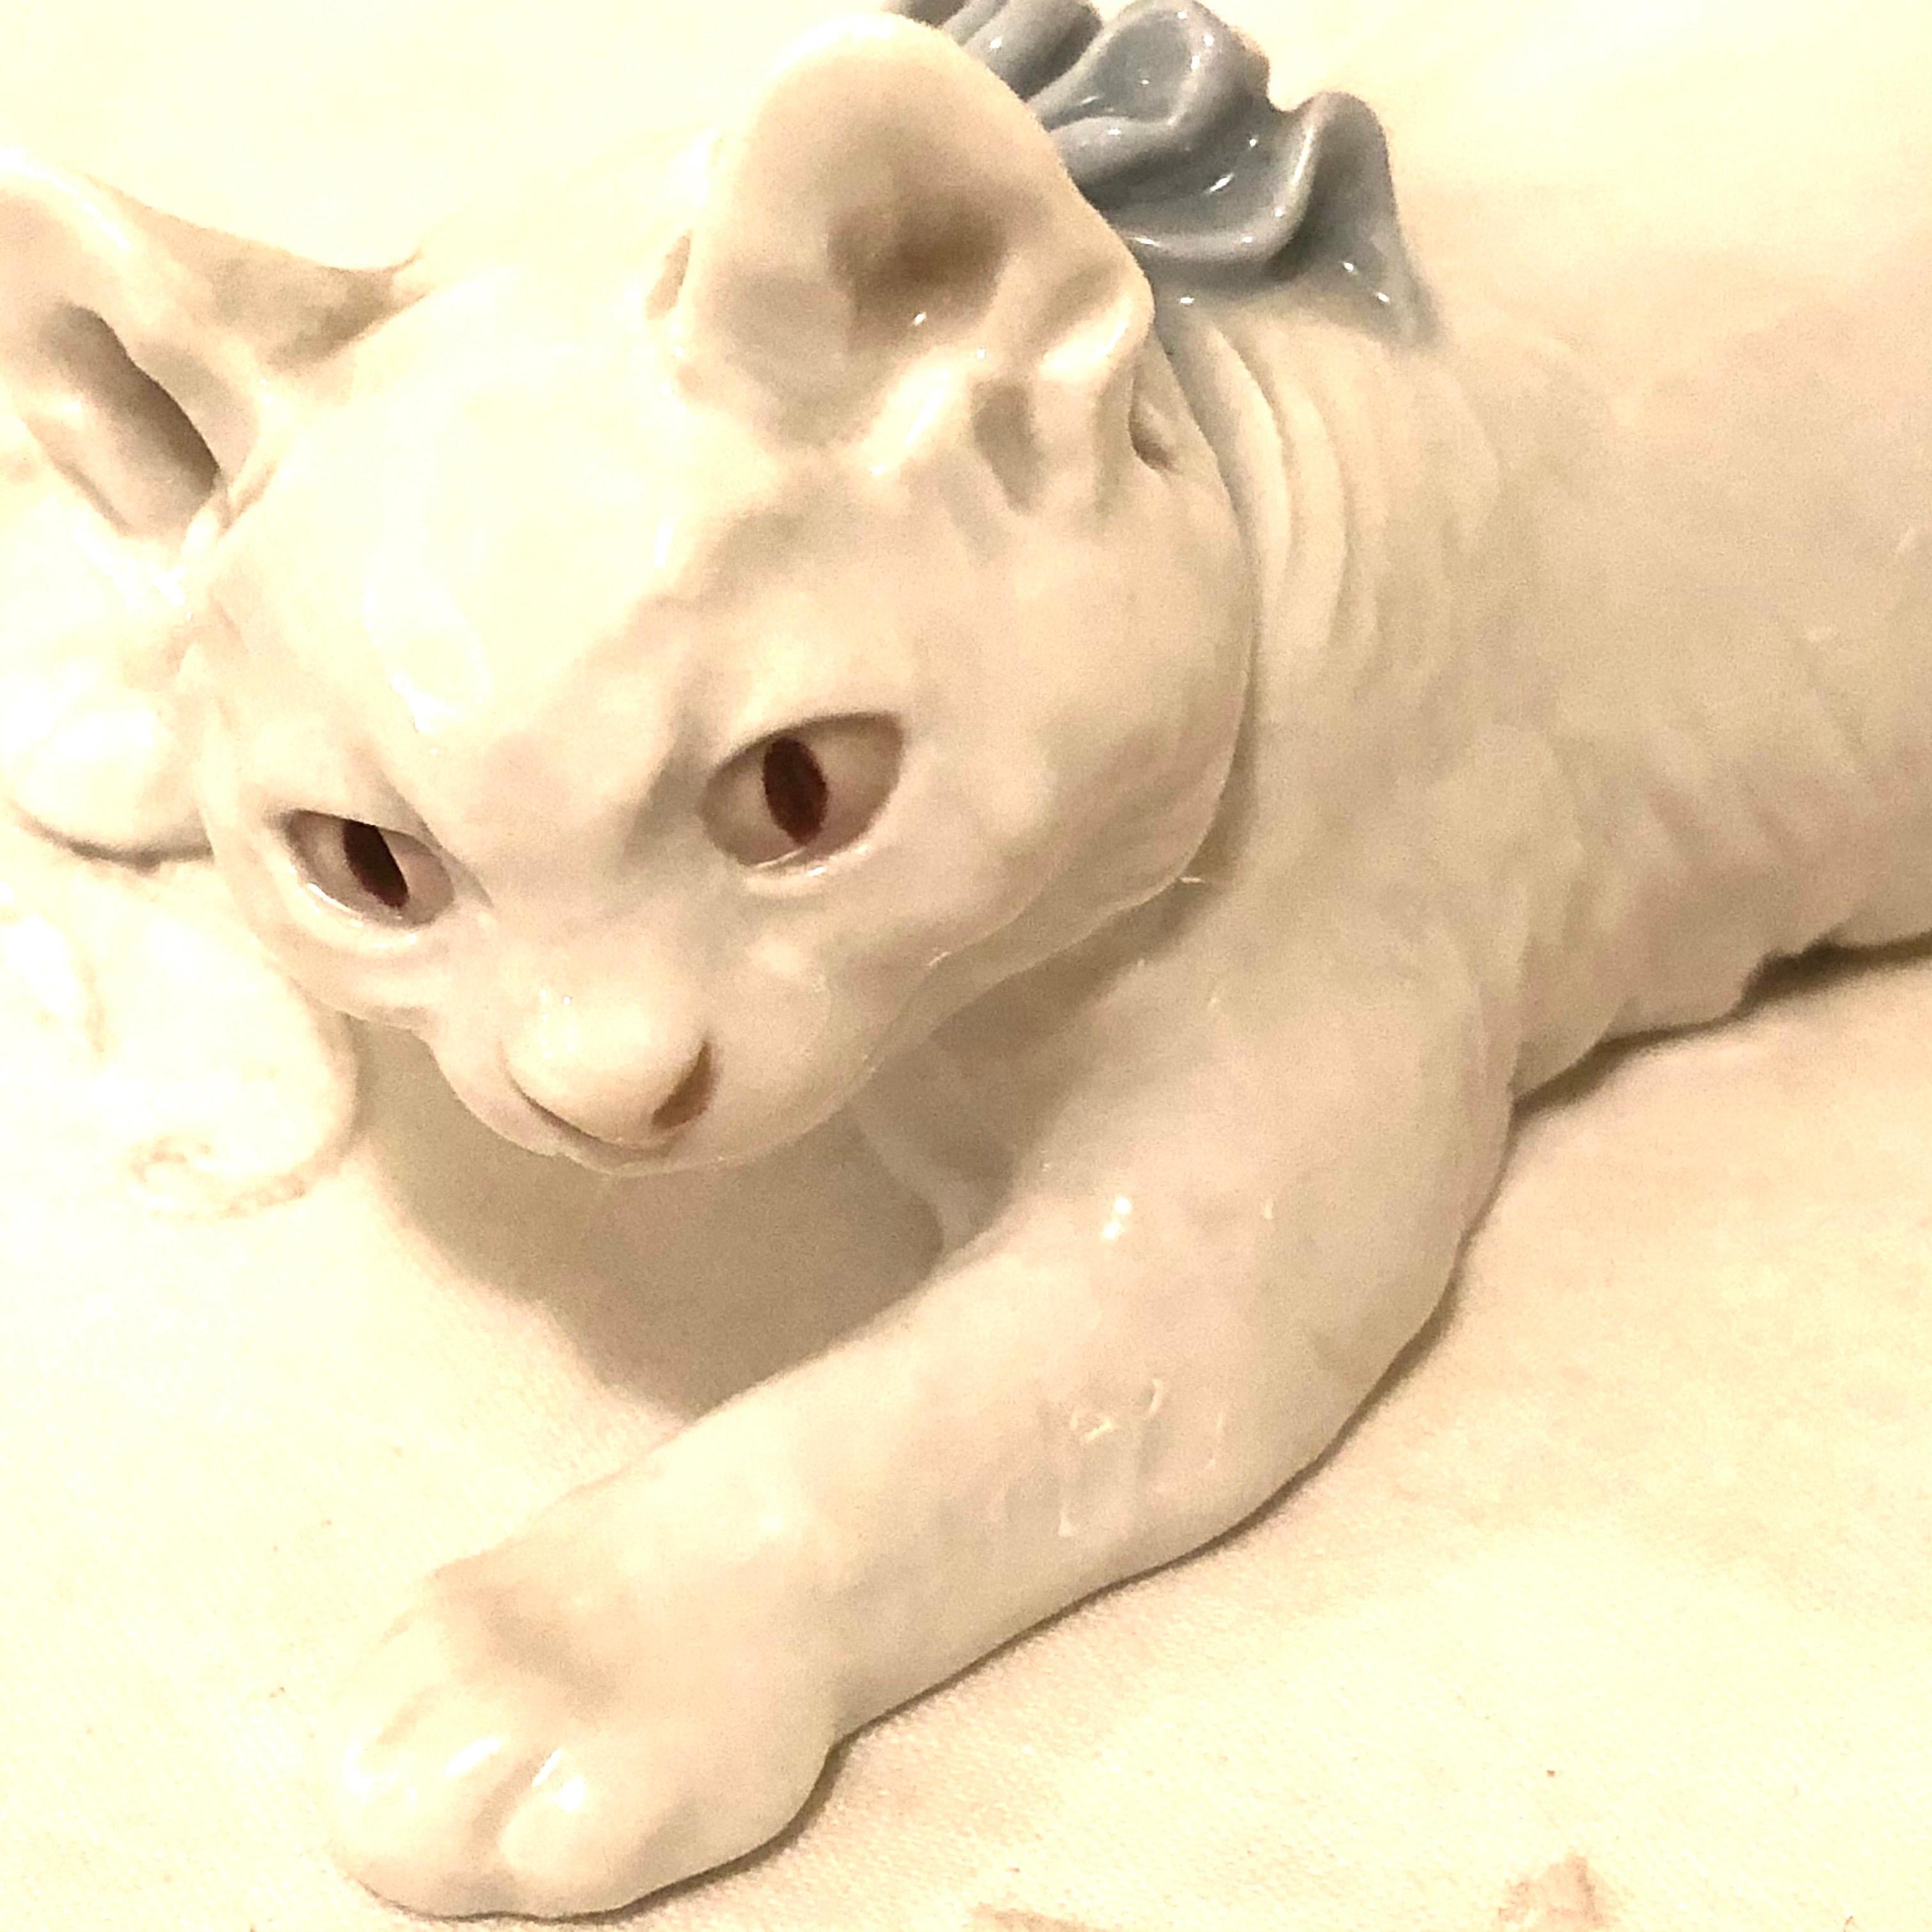 Charming Meissen figure of a finely modeled white cat with a blue bow. The cat looks like he is playing, as he is leaning forward with his long white tail in the air. You can see how realistic his eyes, ears and paws were made. This enchanting